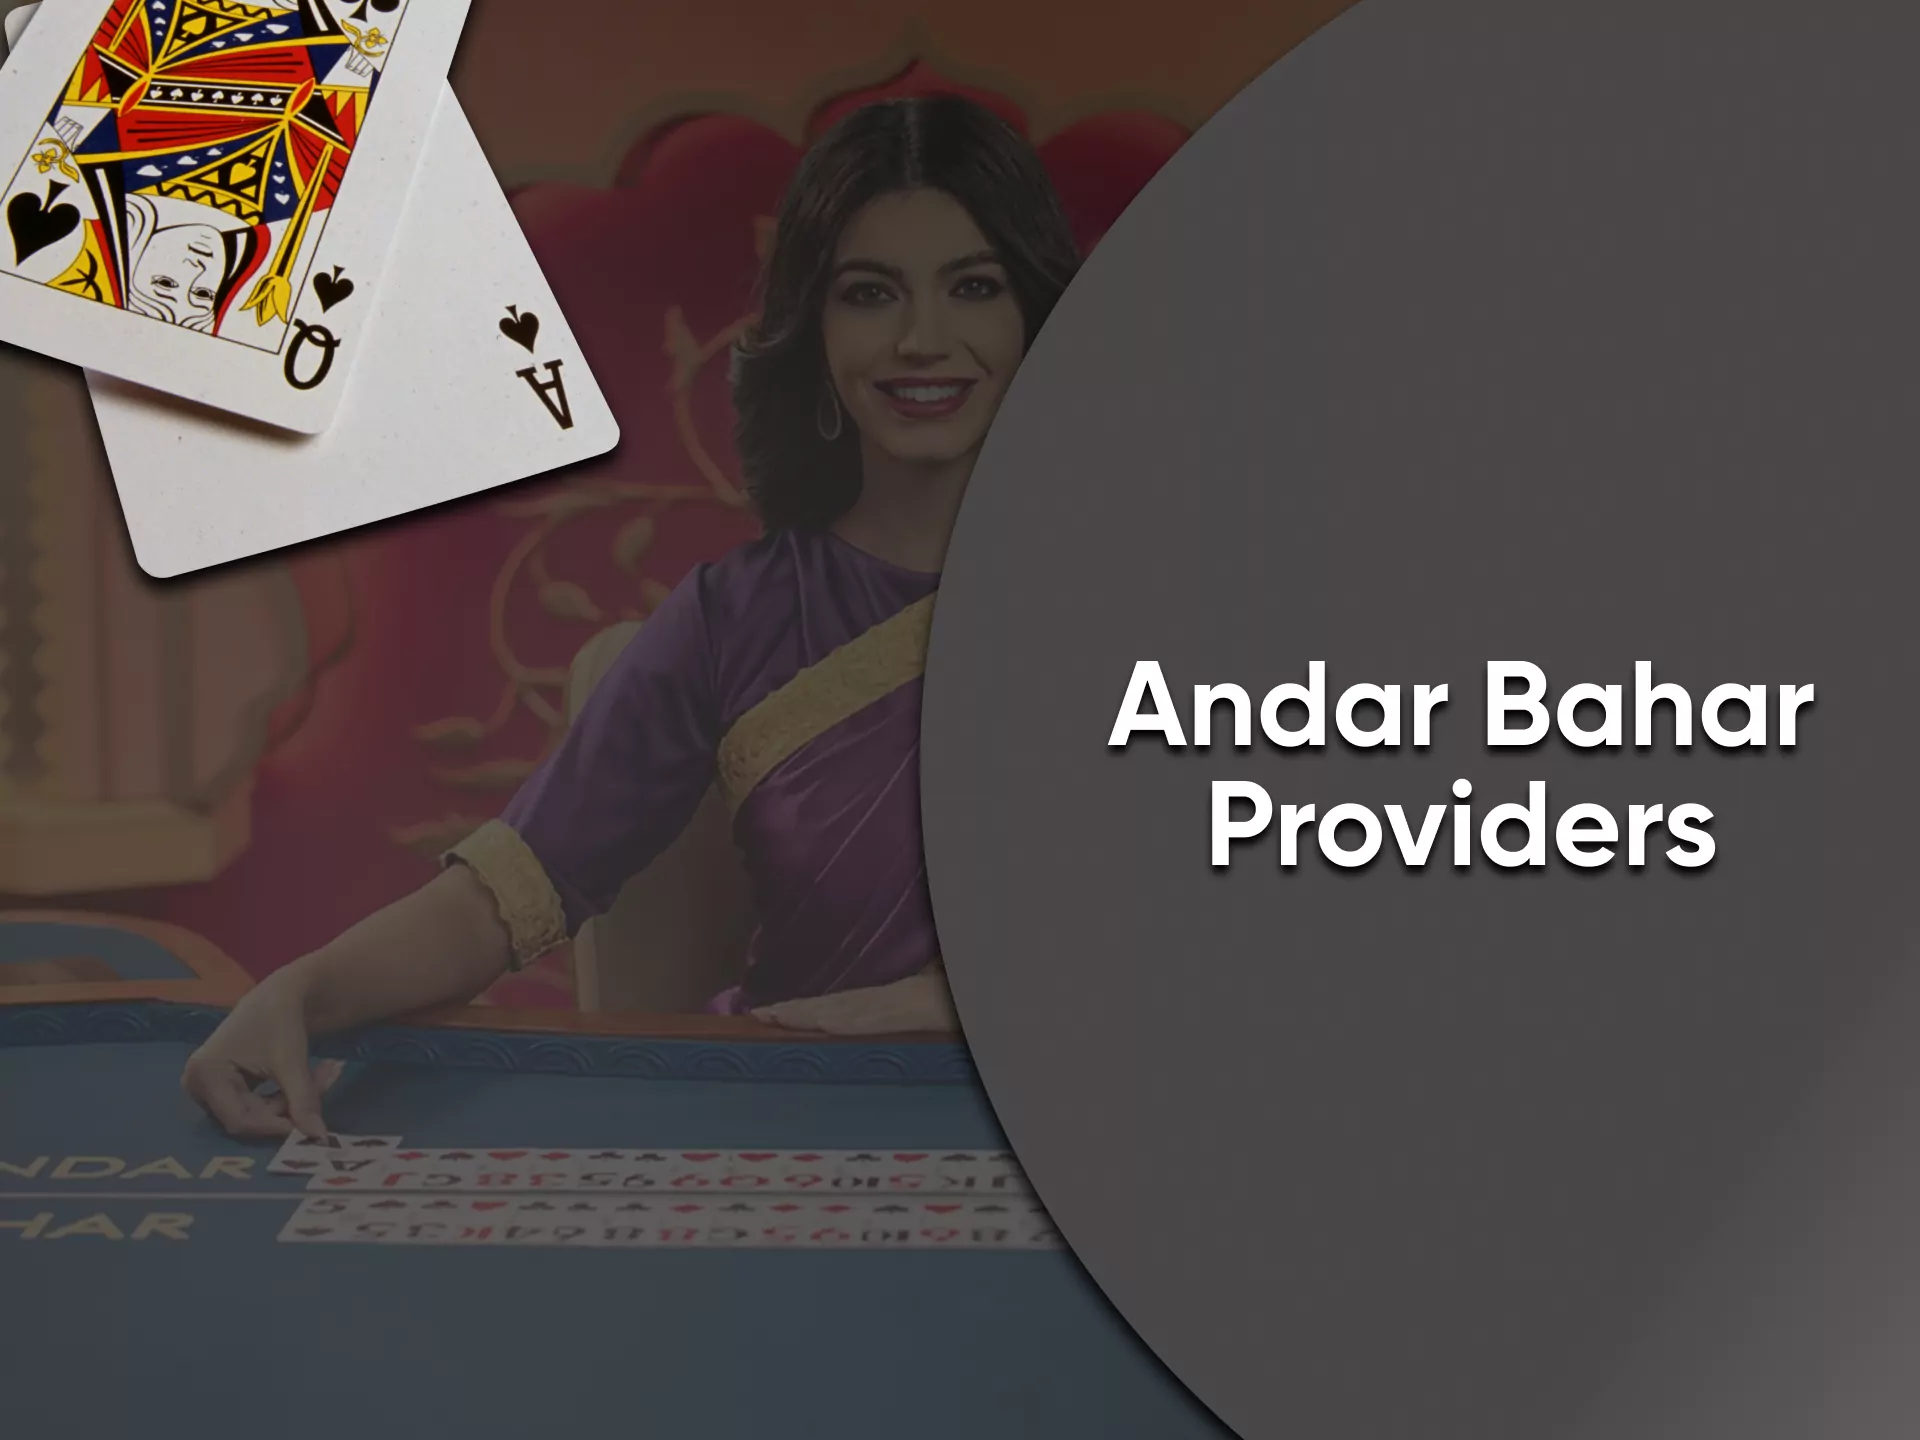 Choose the right service to play Andar Bahar.